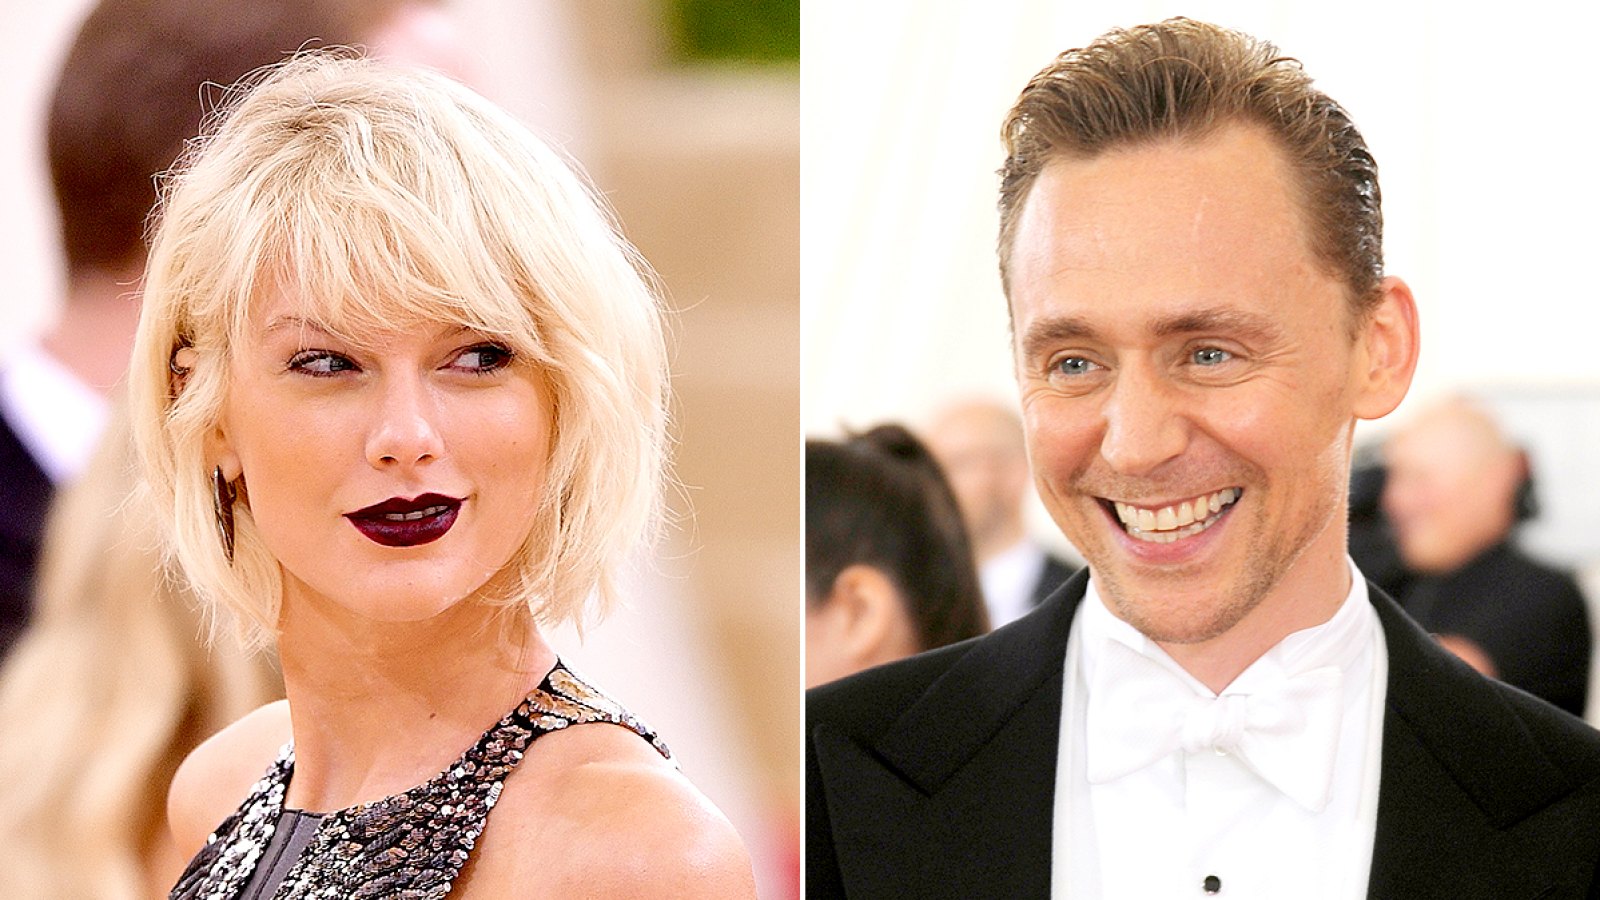 Taylor Swift and Tom Hiddleston